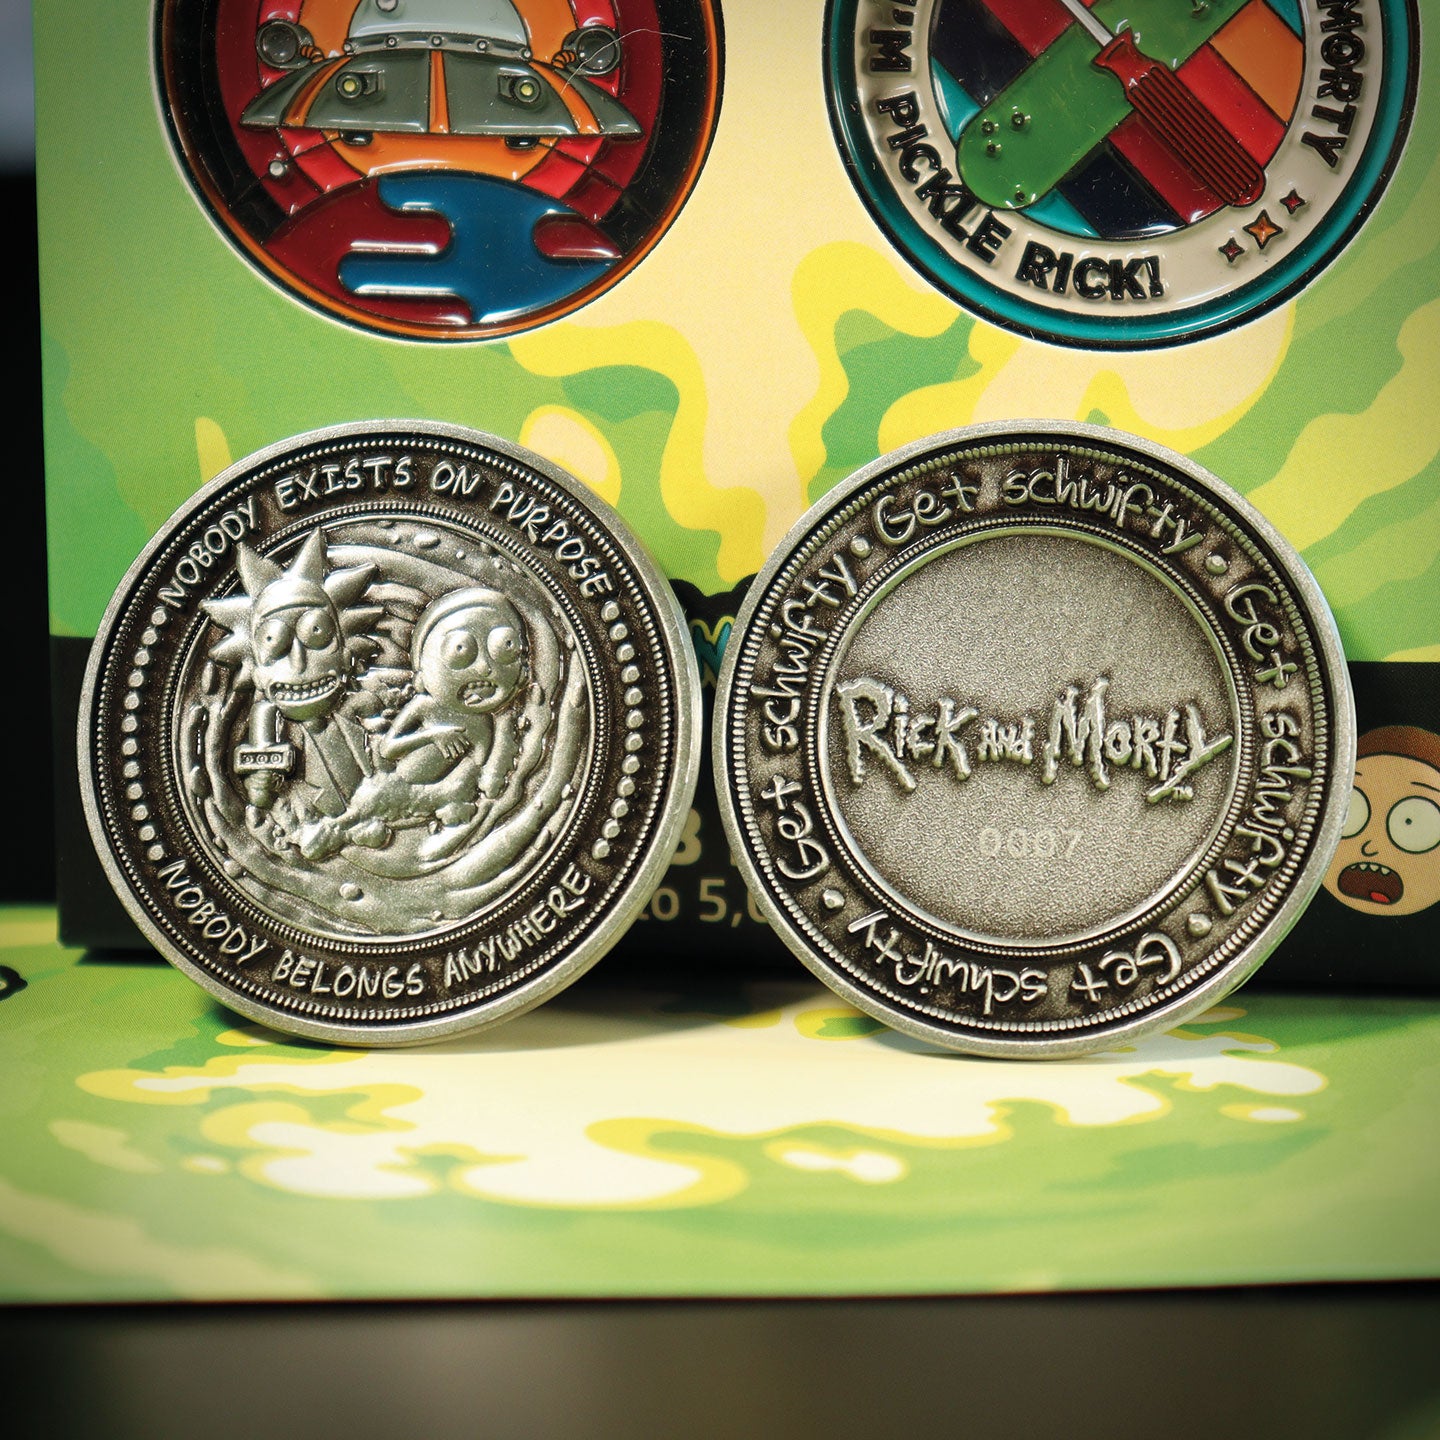 Ricky & Morty Limited Edition Collectible Coin